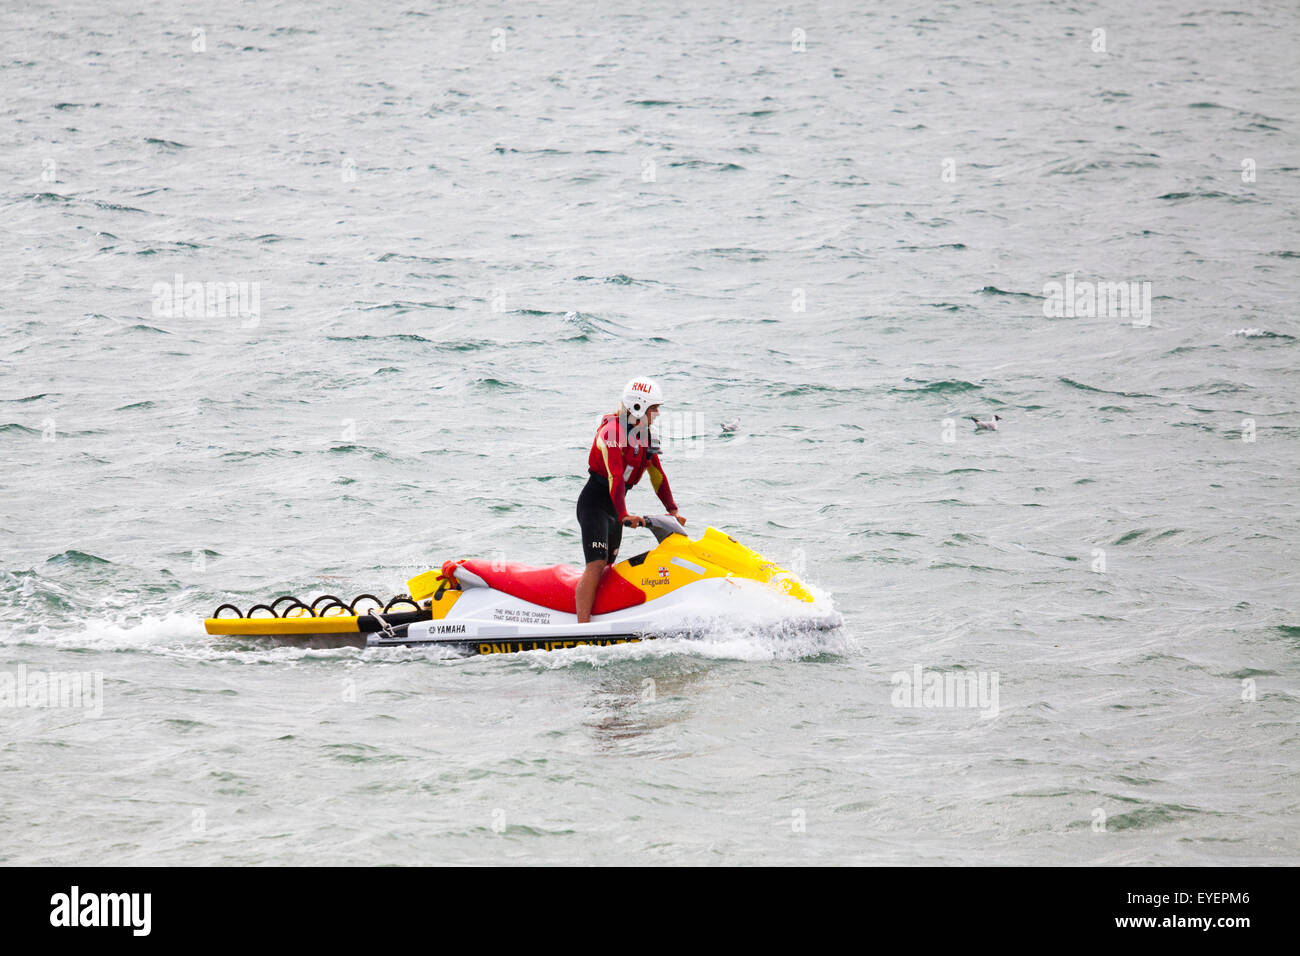 Lifeguard patrols off beach on a jet ski water scooter with grab platform Stock Photo